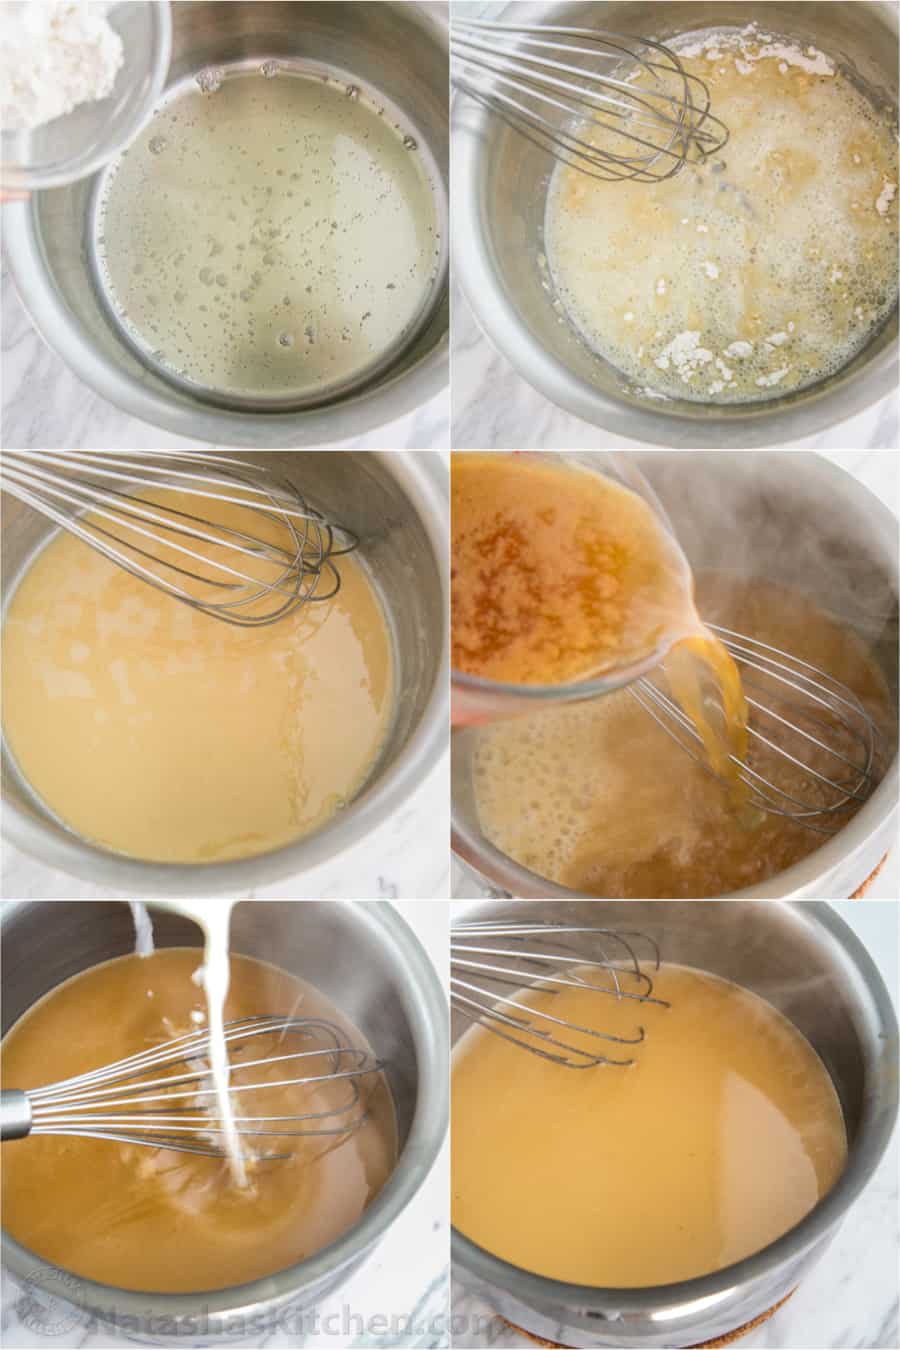 How to make sauce using a roux for Thanksgiving dinner